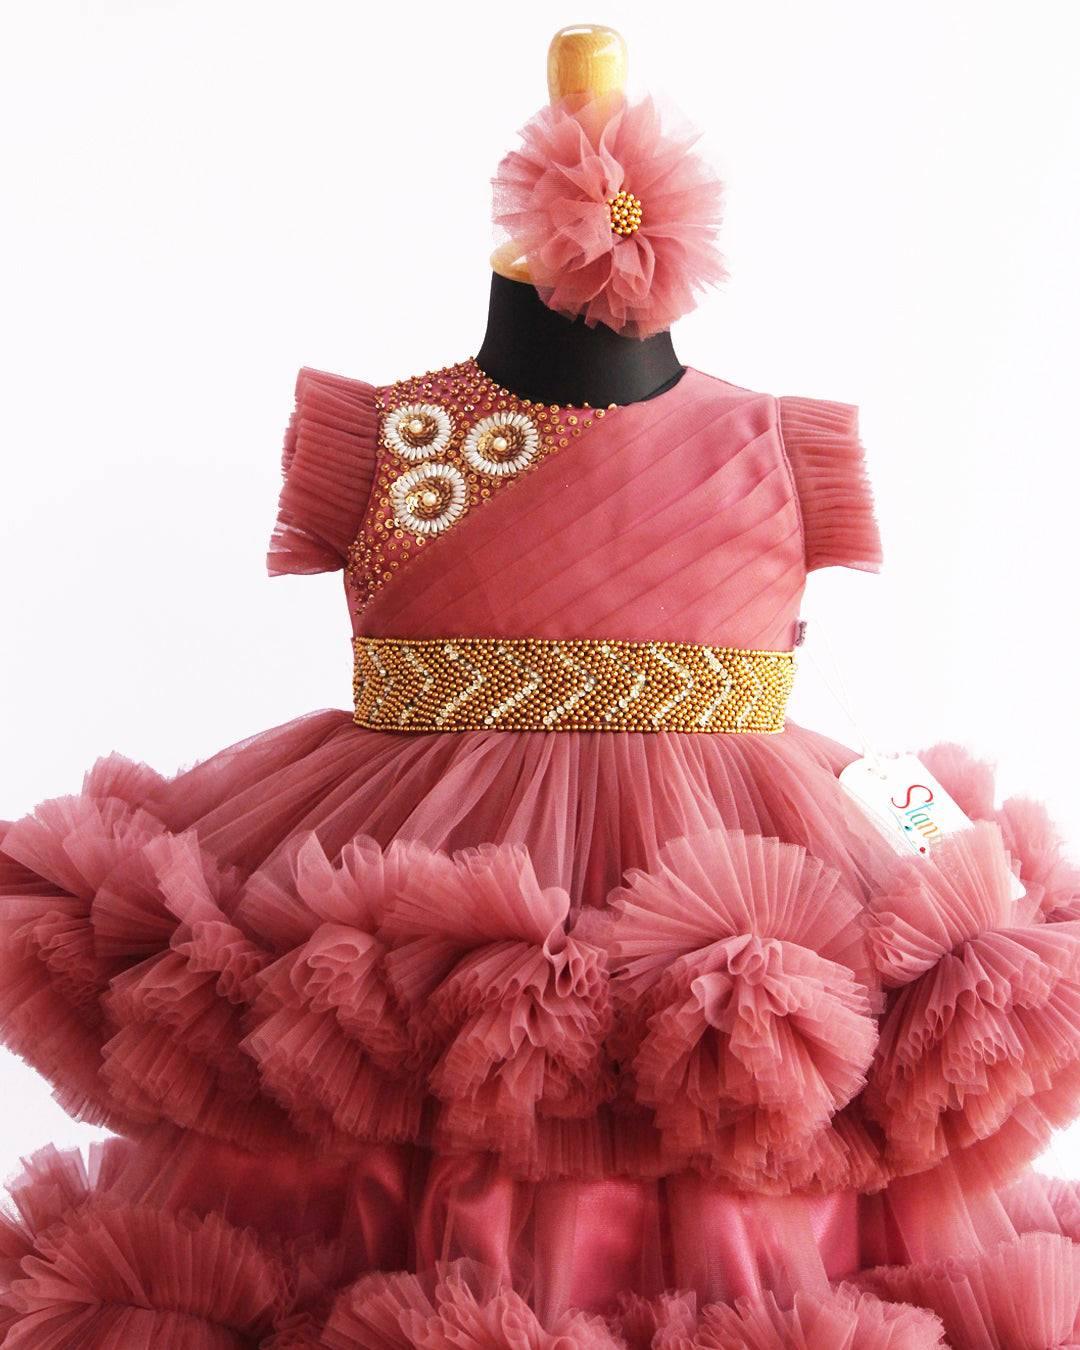 Blush Pink Layered Pleated Heavy Ruffled Hand Embroidery Birthday Froc